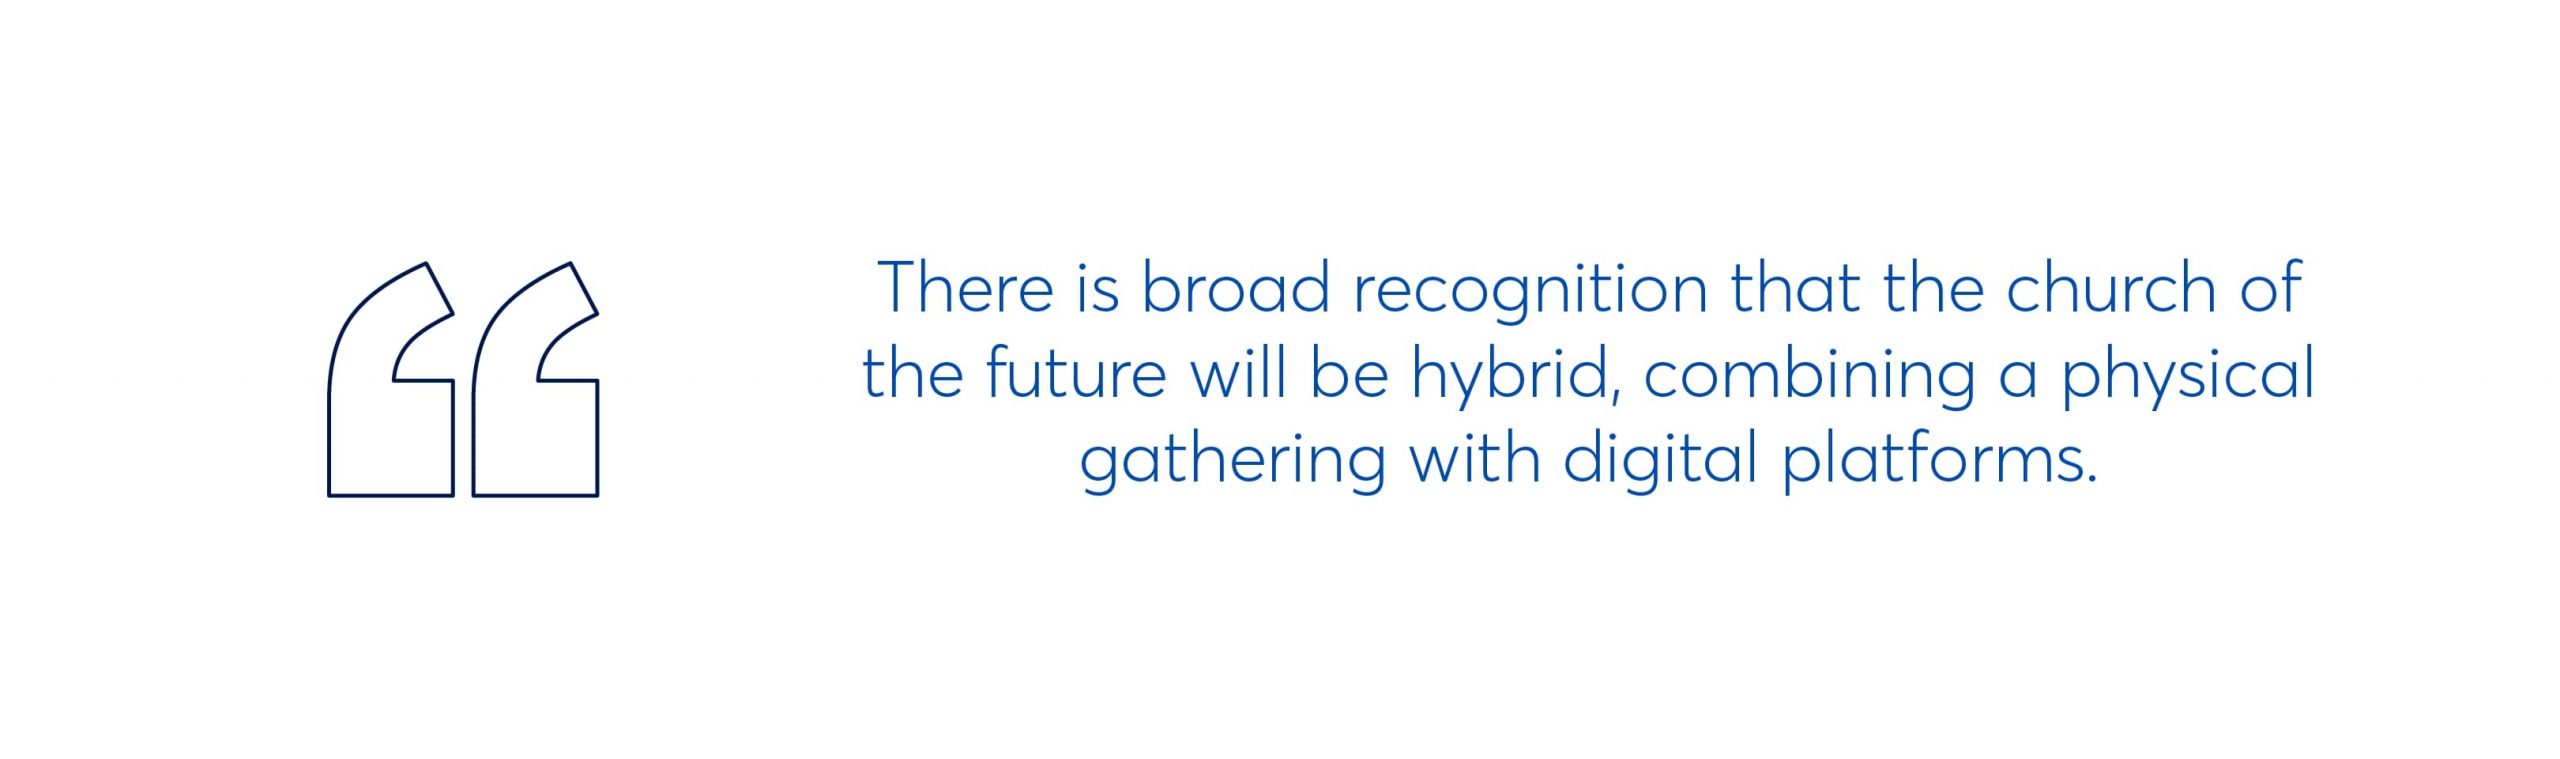 there is broad recognition that they church of the future will be hybrid, combining a physical gathering with digital platforms